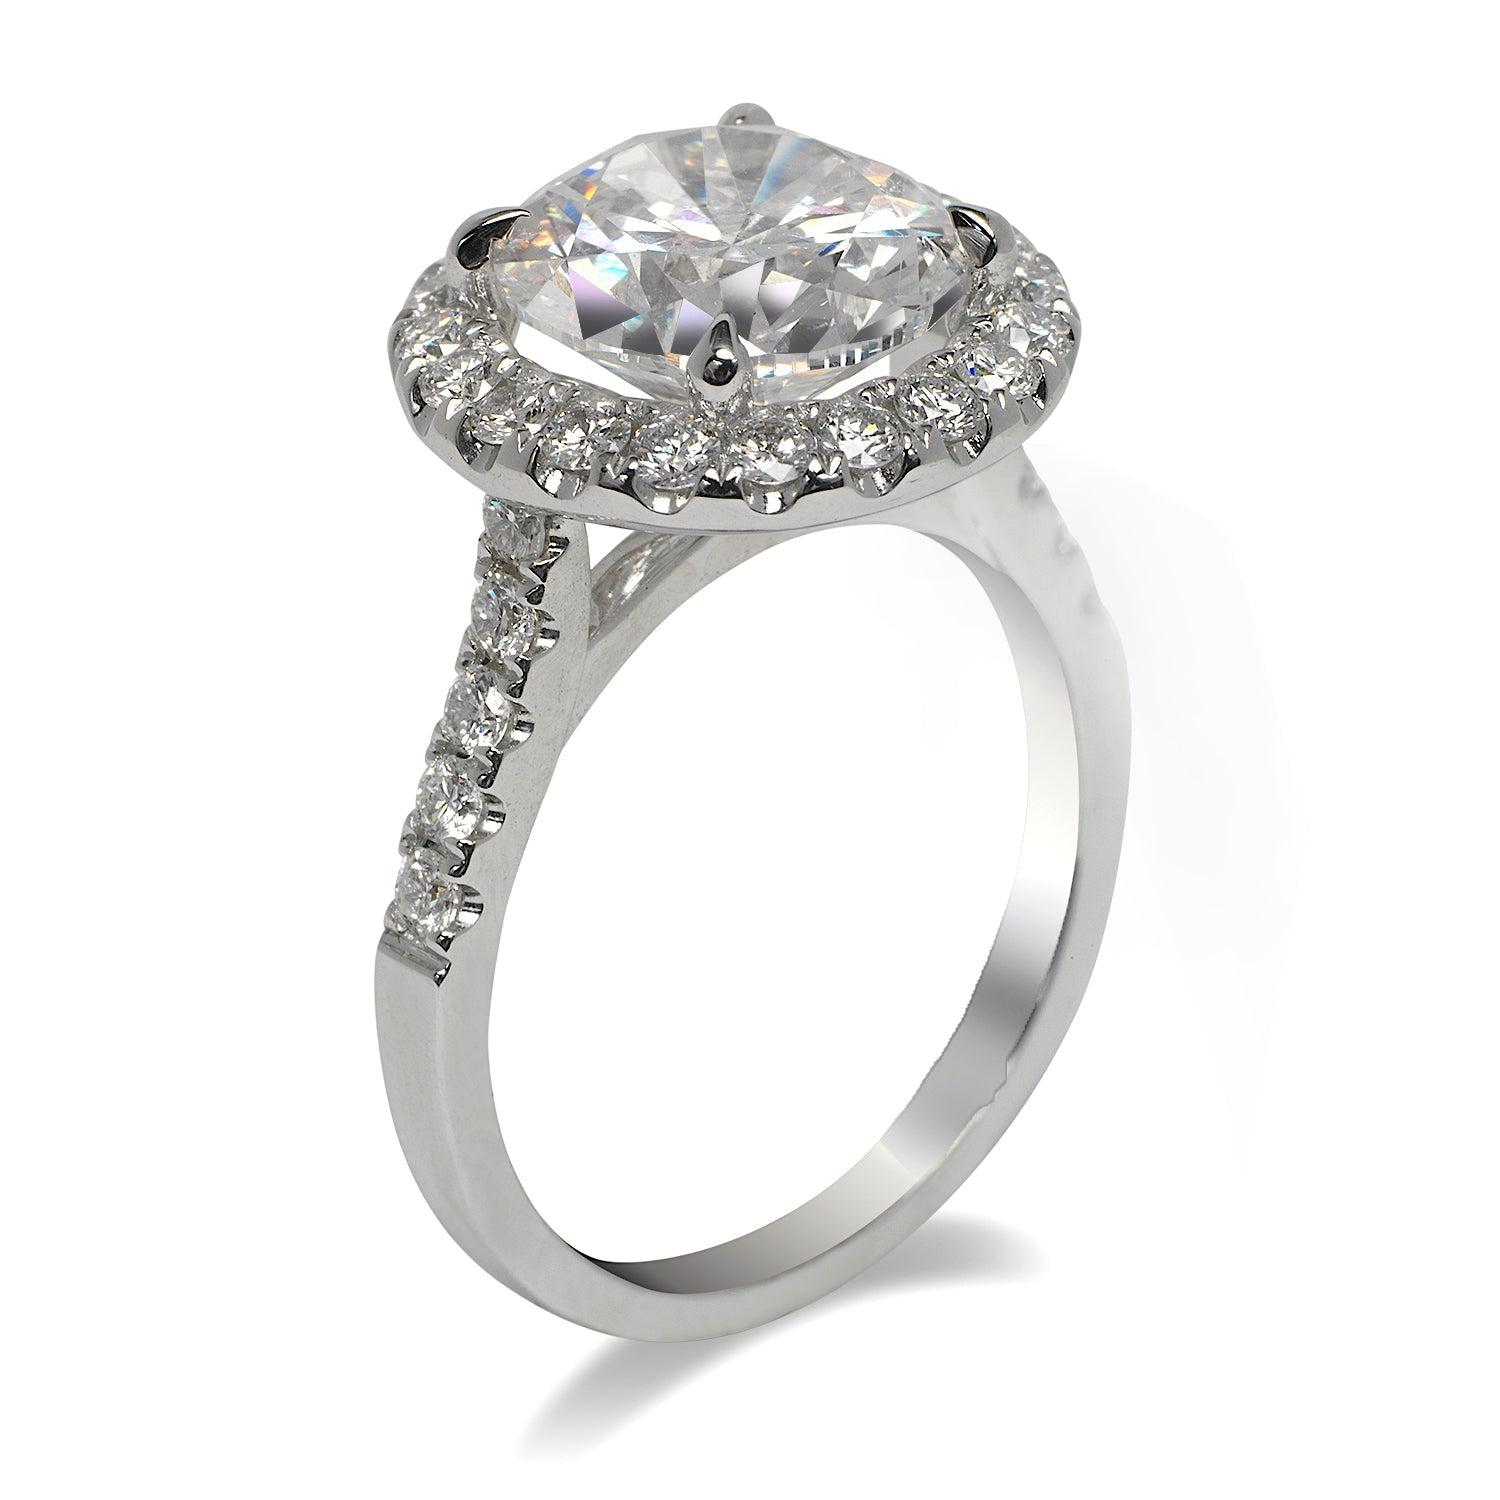 5 Carat Round Cut Diamond Engagement Ring EGL Certified E VS2 In New Condition For Sale In New York, NY